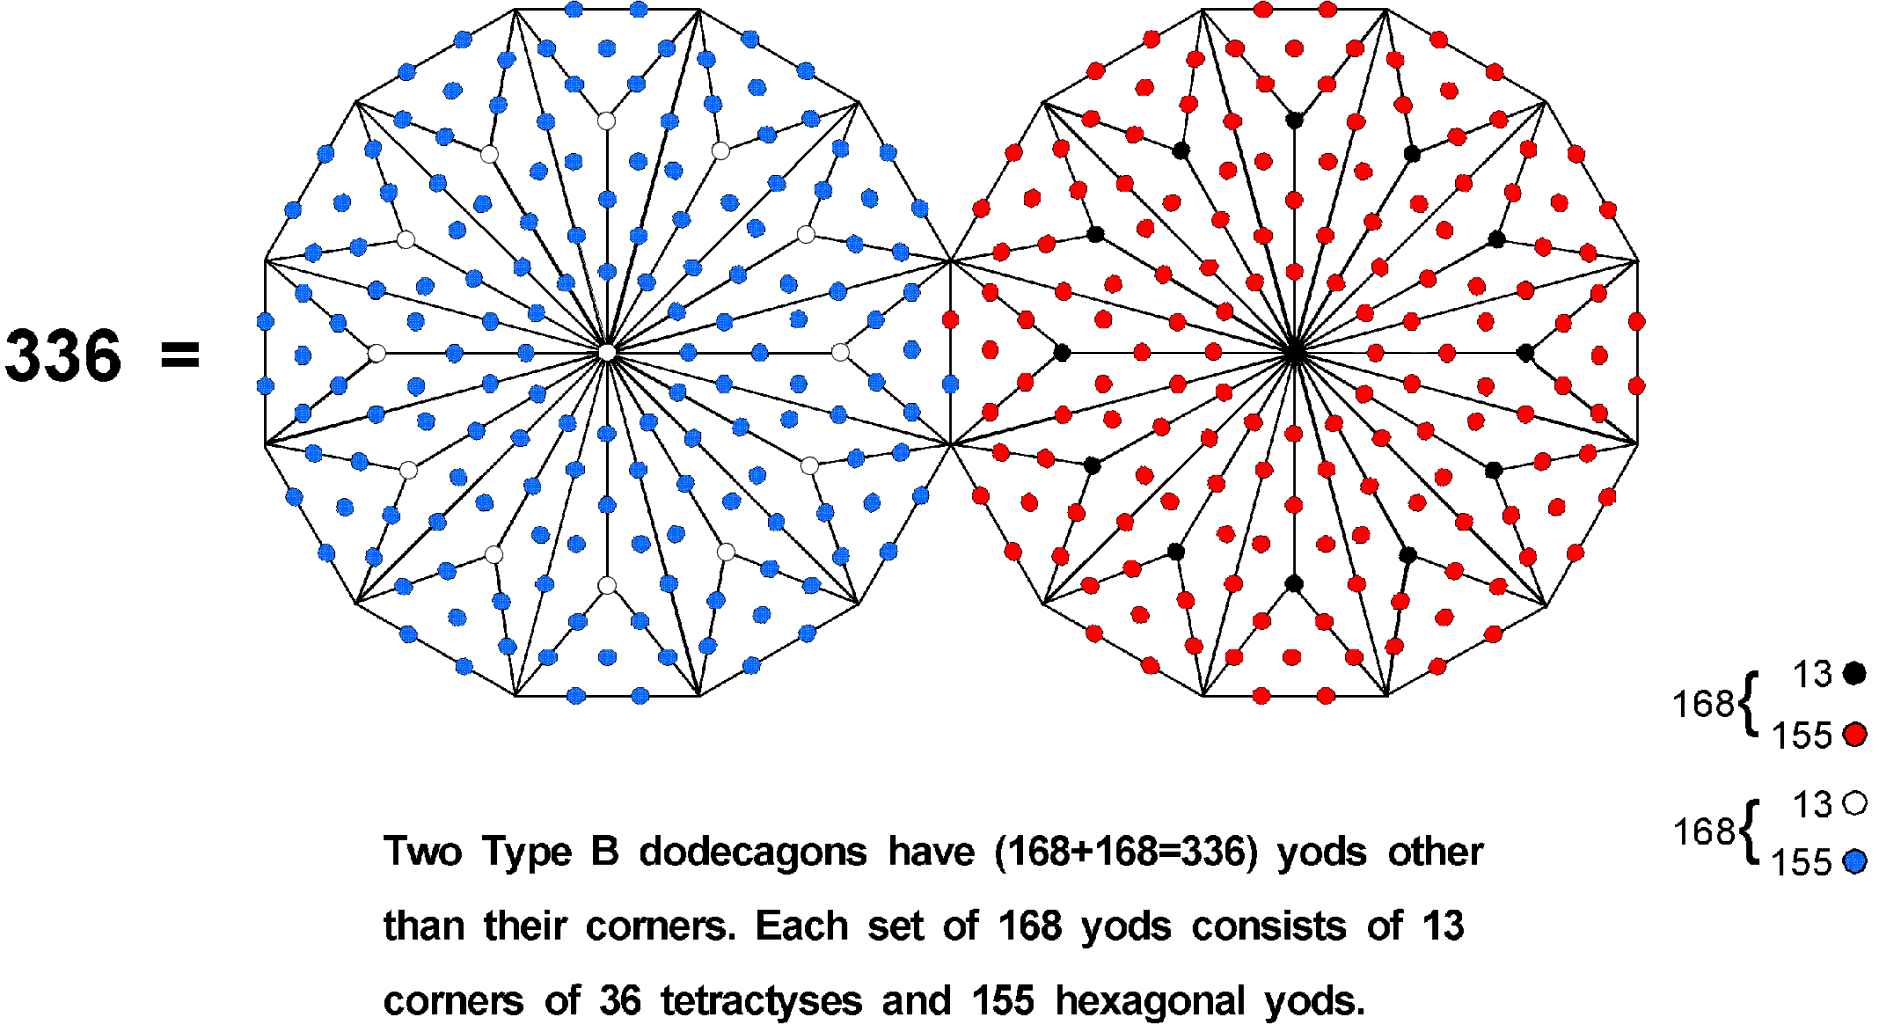 (13+155) yods associated with each Type B dodecagon